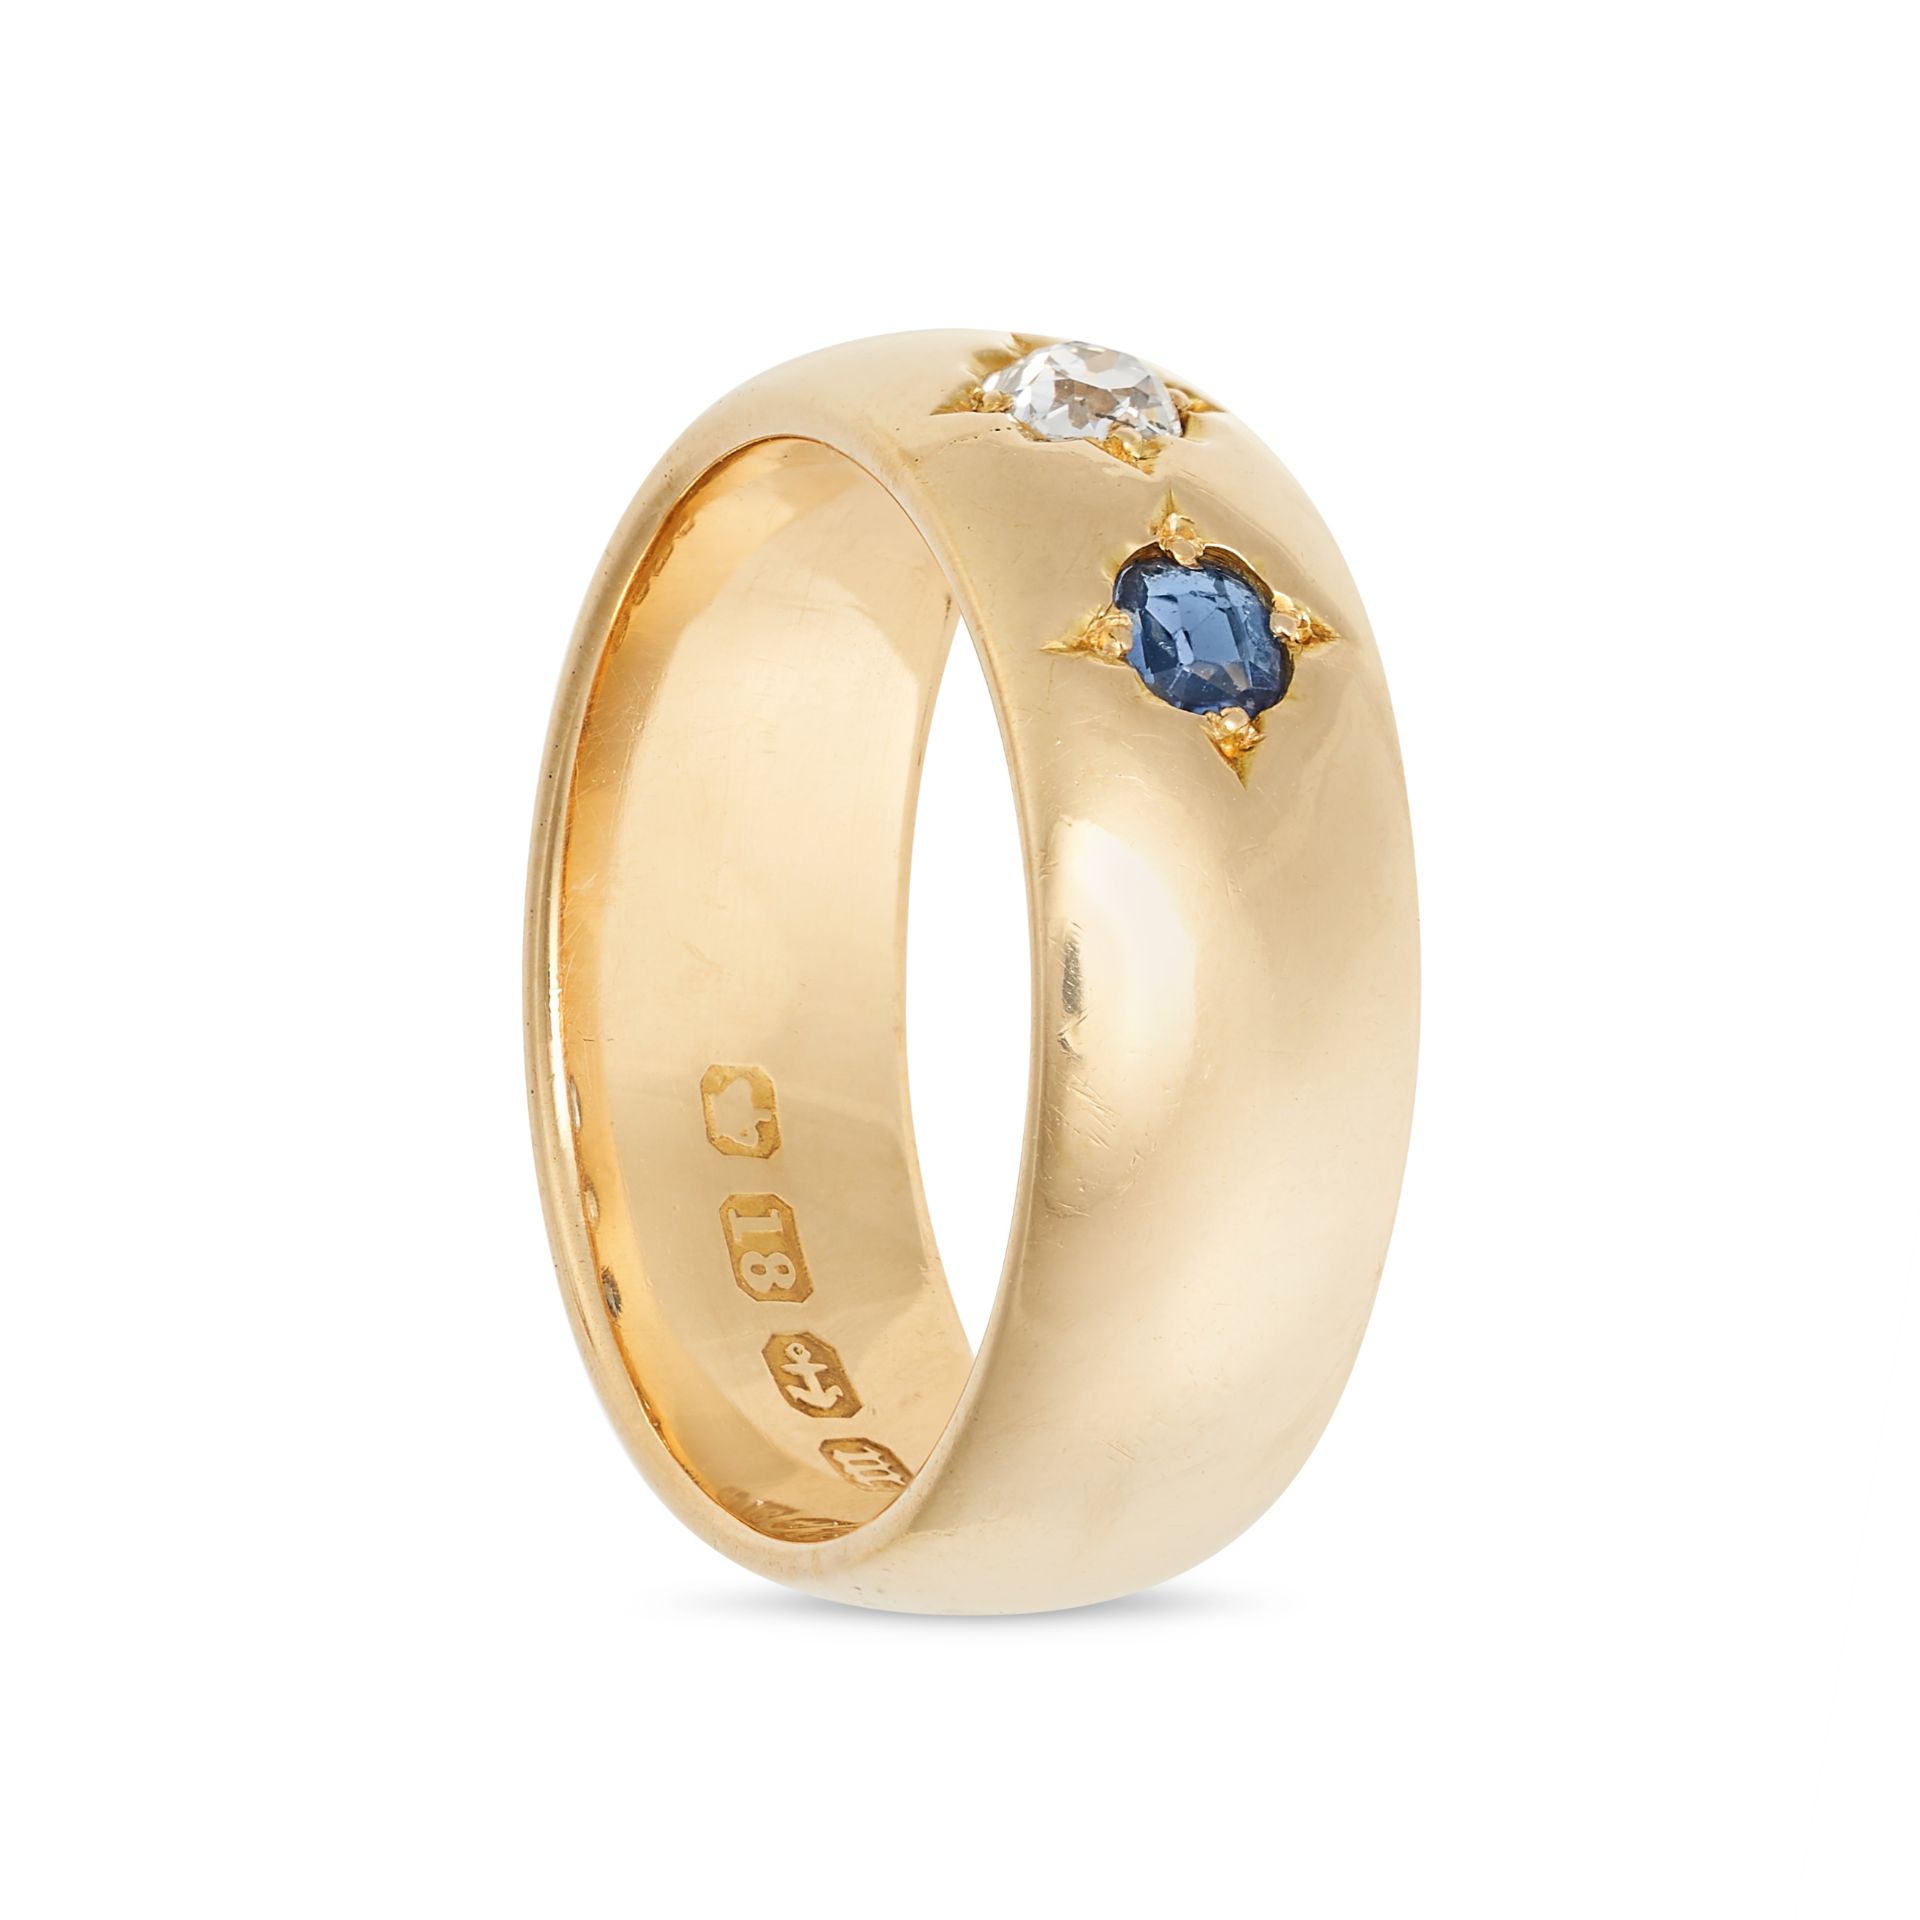 AN ANTIQUE VICTORIAN SAPPHIRE AND DIAMOND GYPSY RING in 18ct yellow gold, set with an old cut dia... - Image 2 of 2